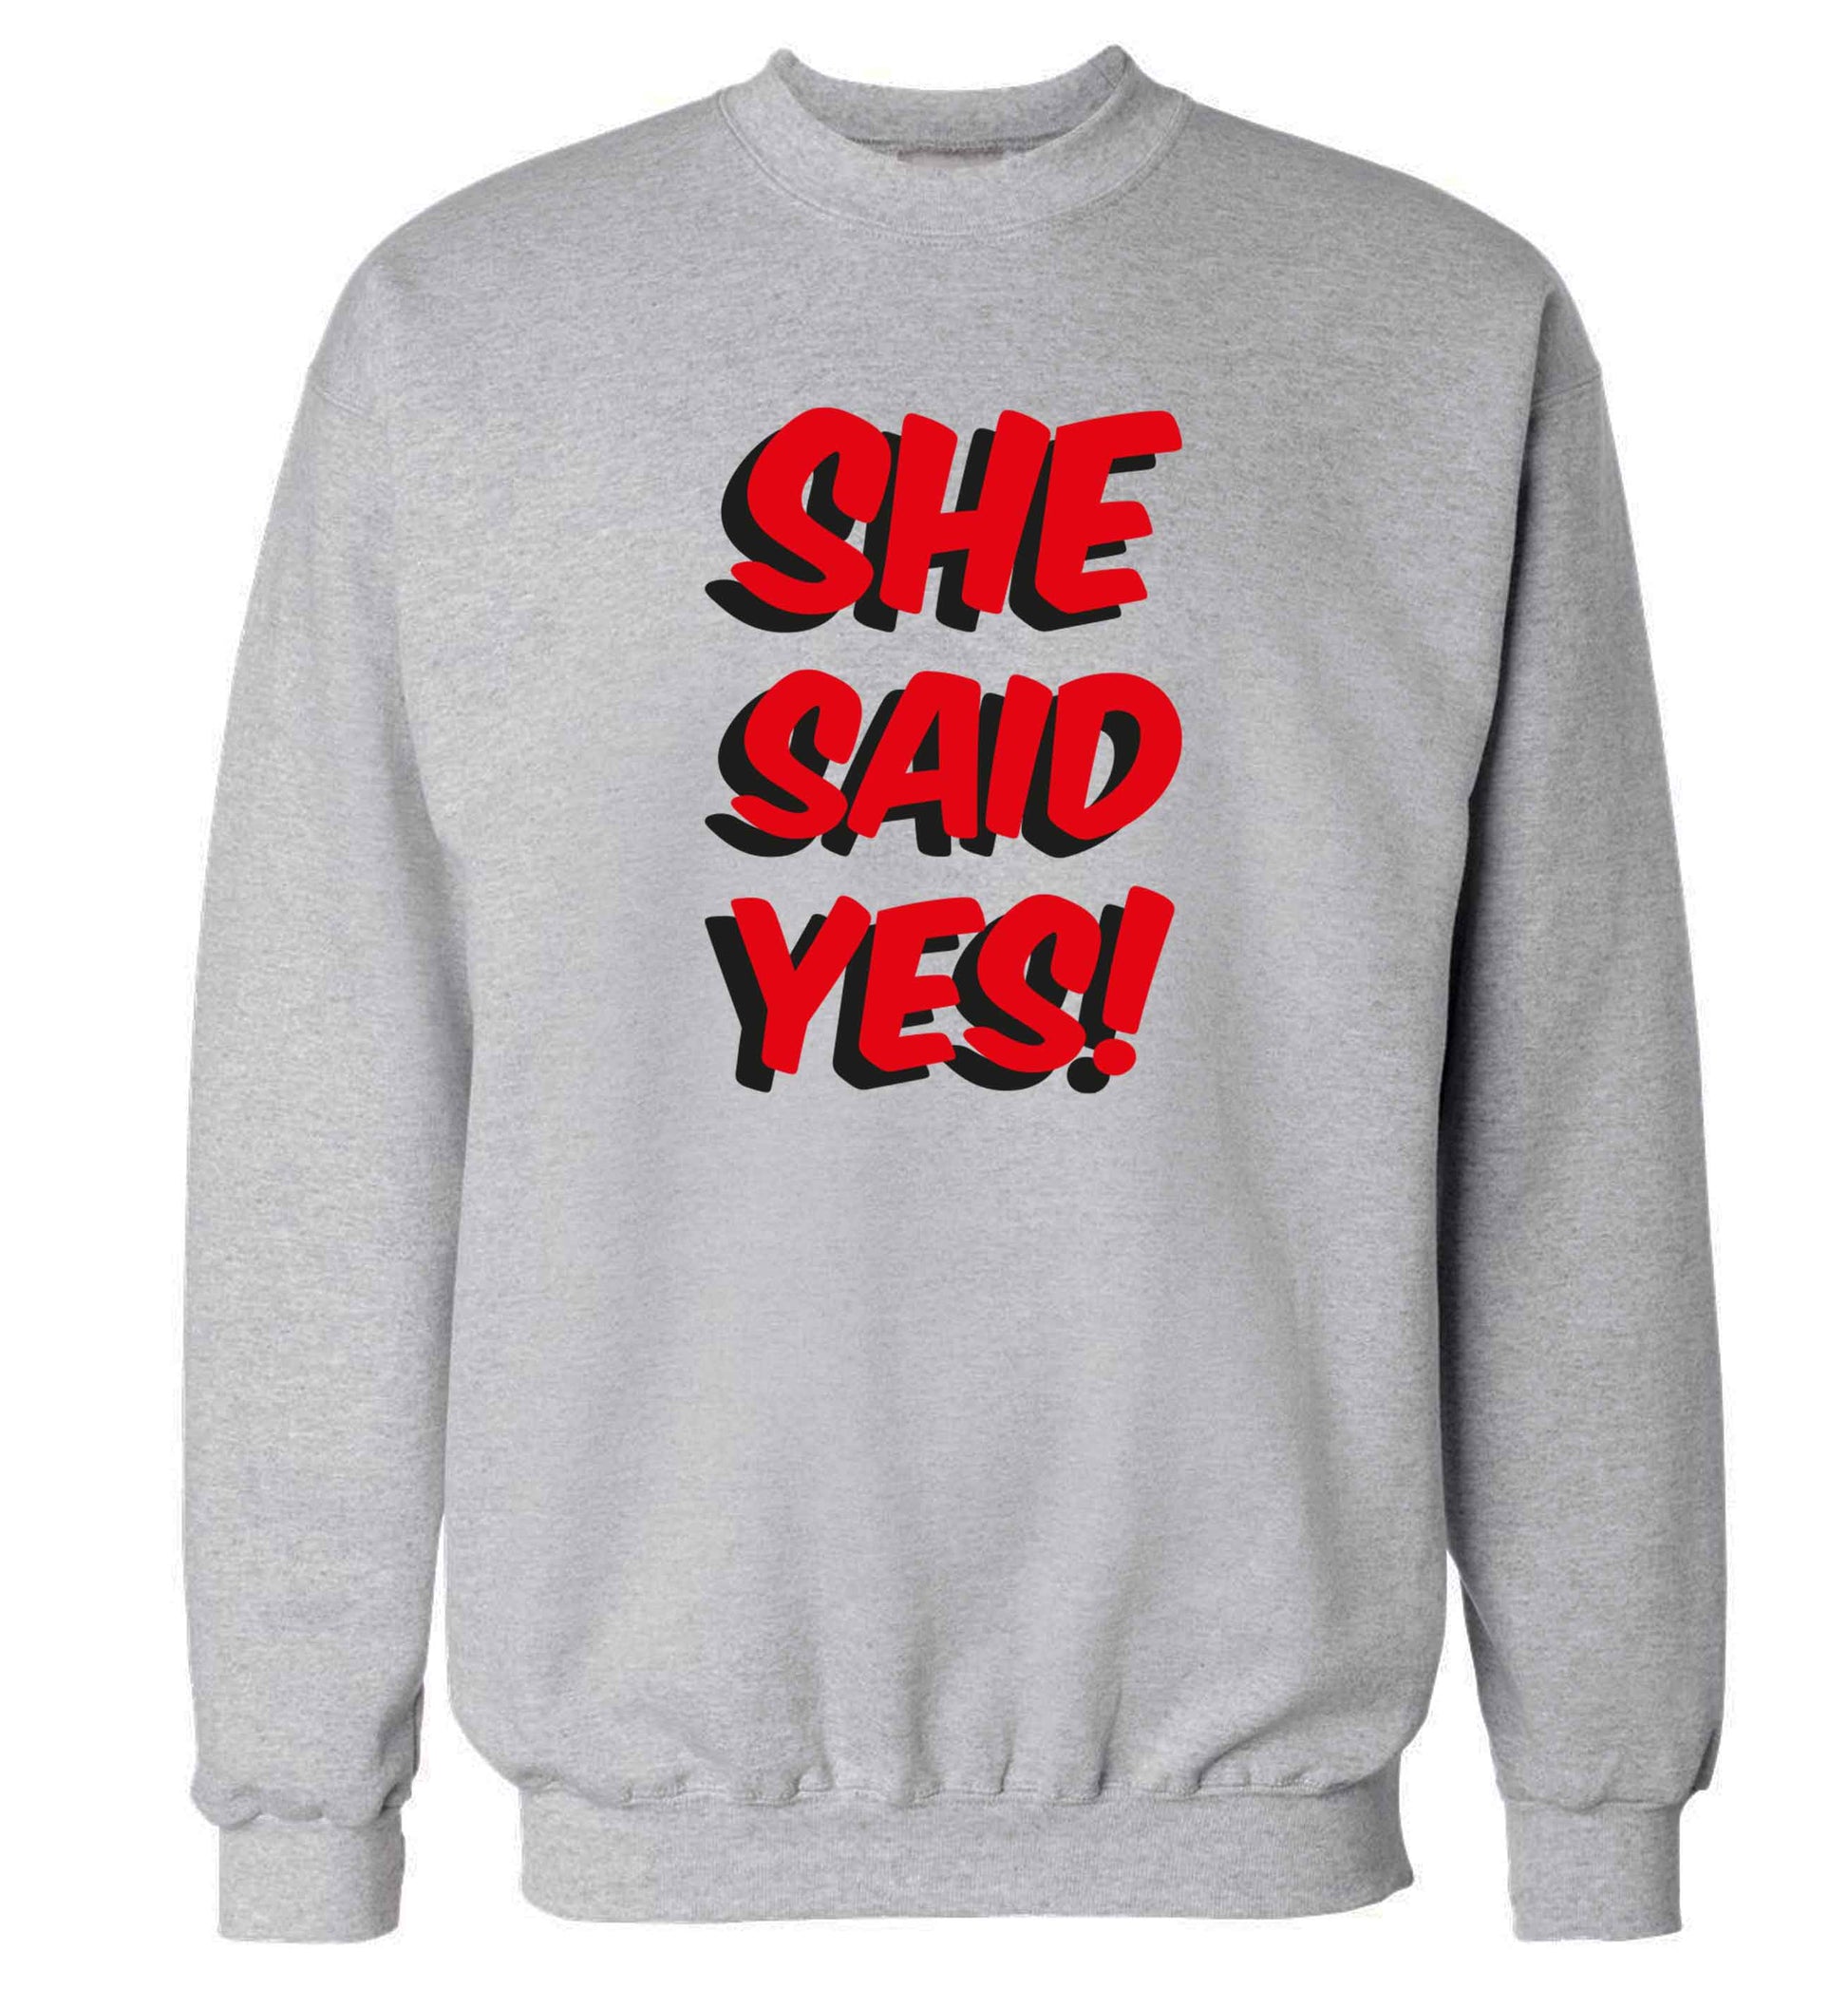 She said yes adult's unisex grey sweater 2XL